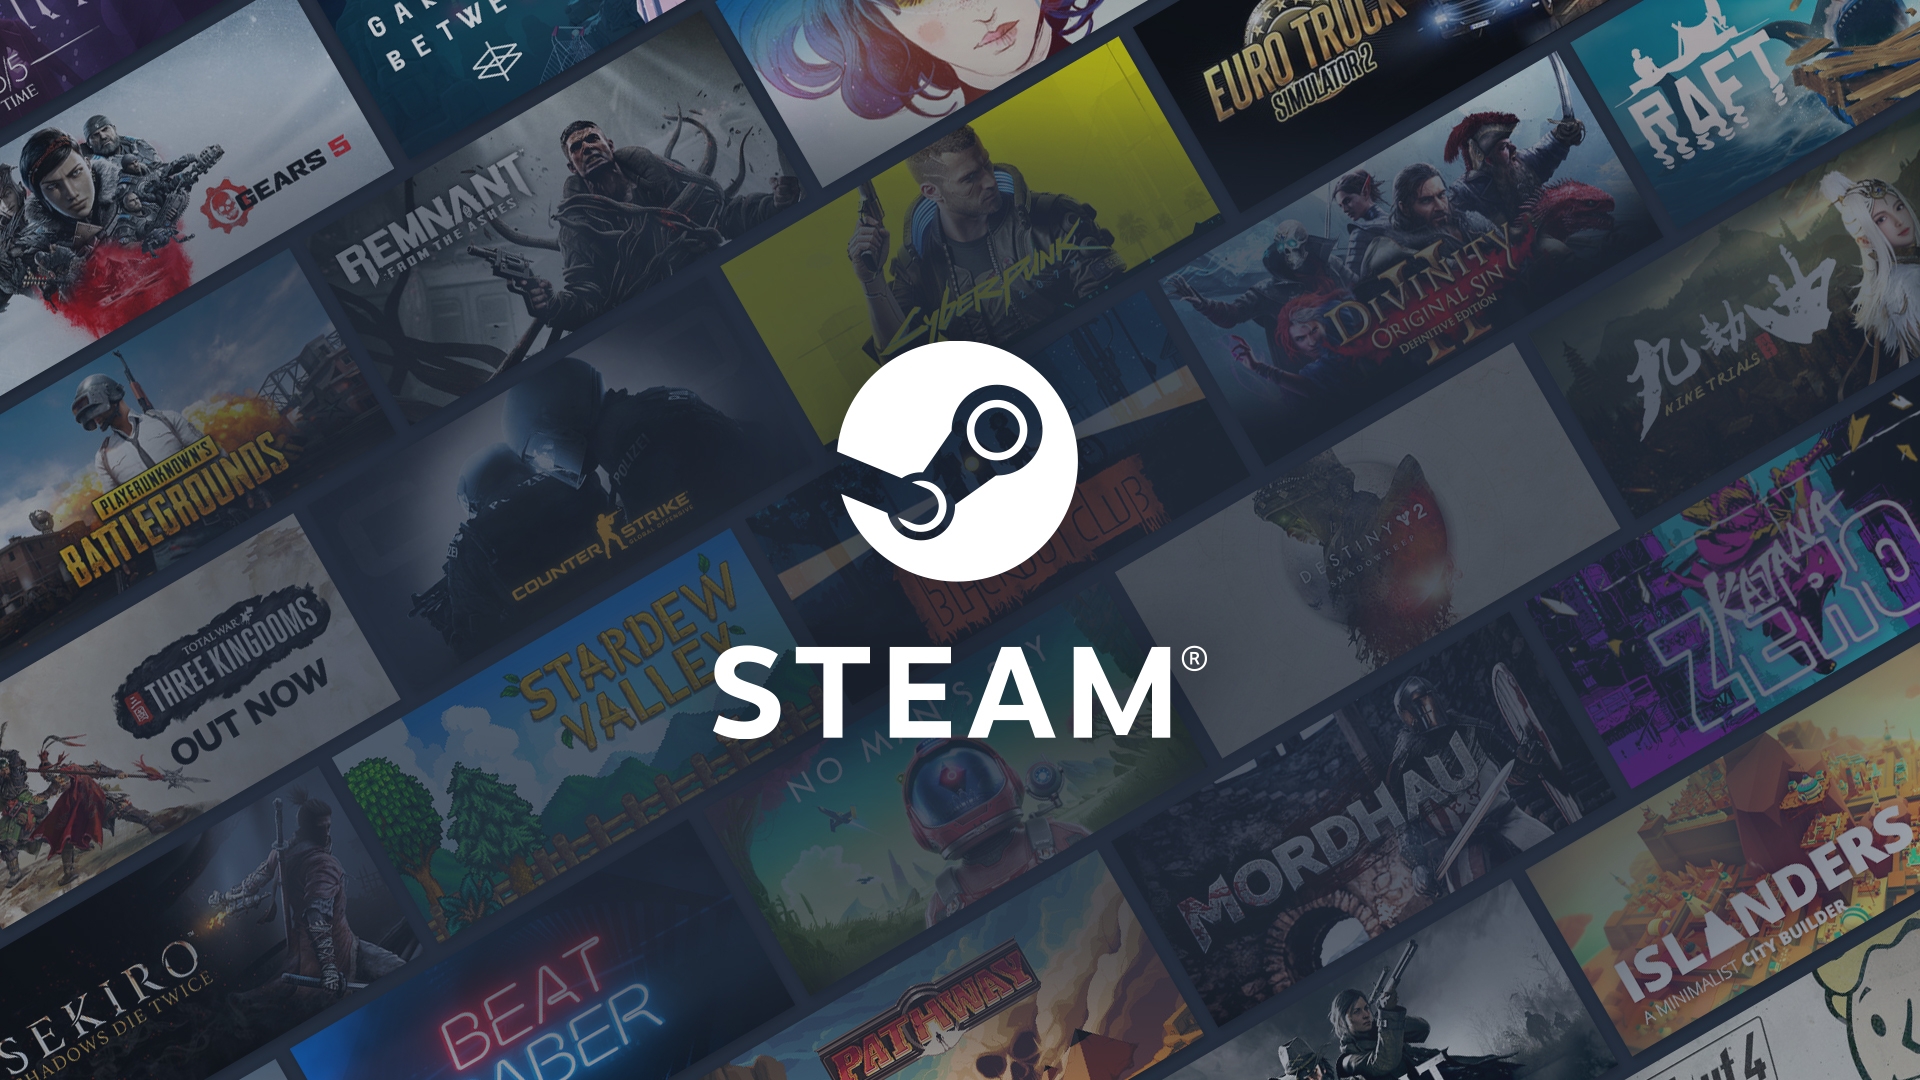 Some gamers are having trouble with Steam not downloading what they want it to, so today we will cover a few fixes that might resolve this issue.